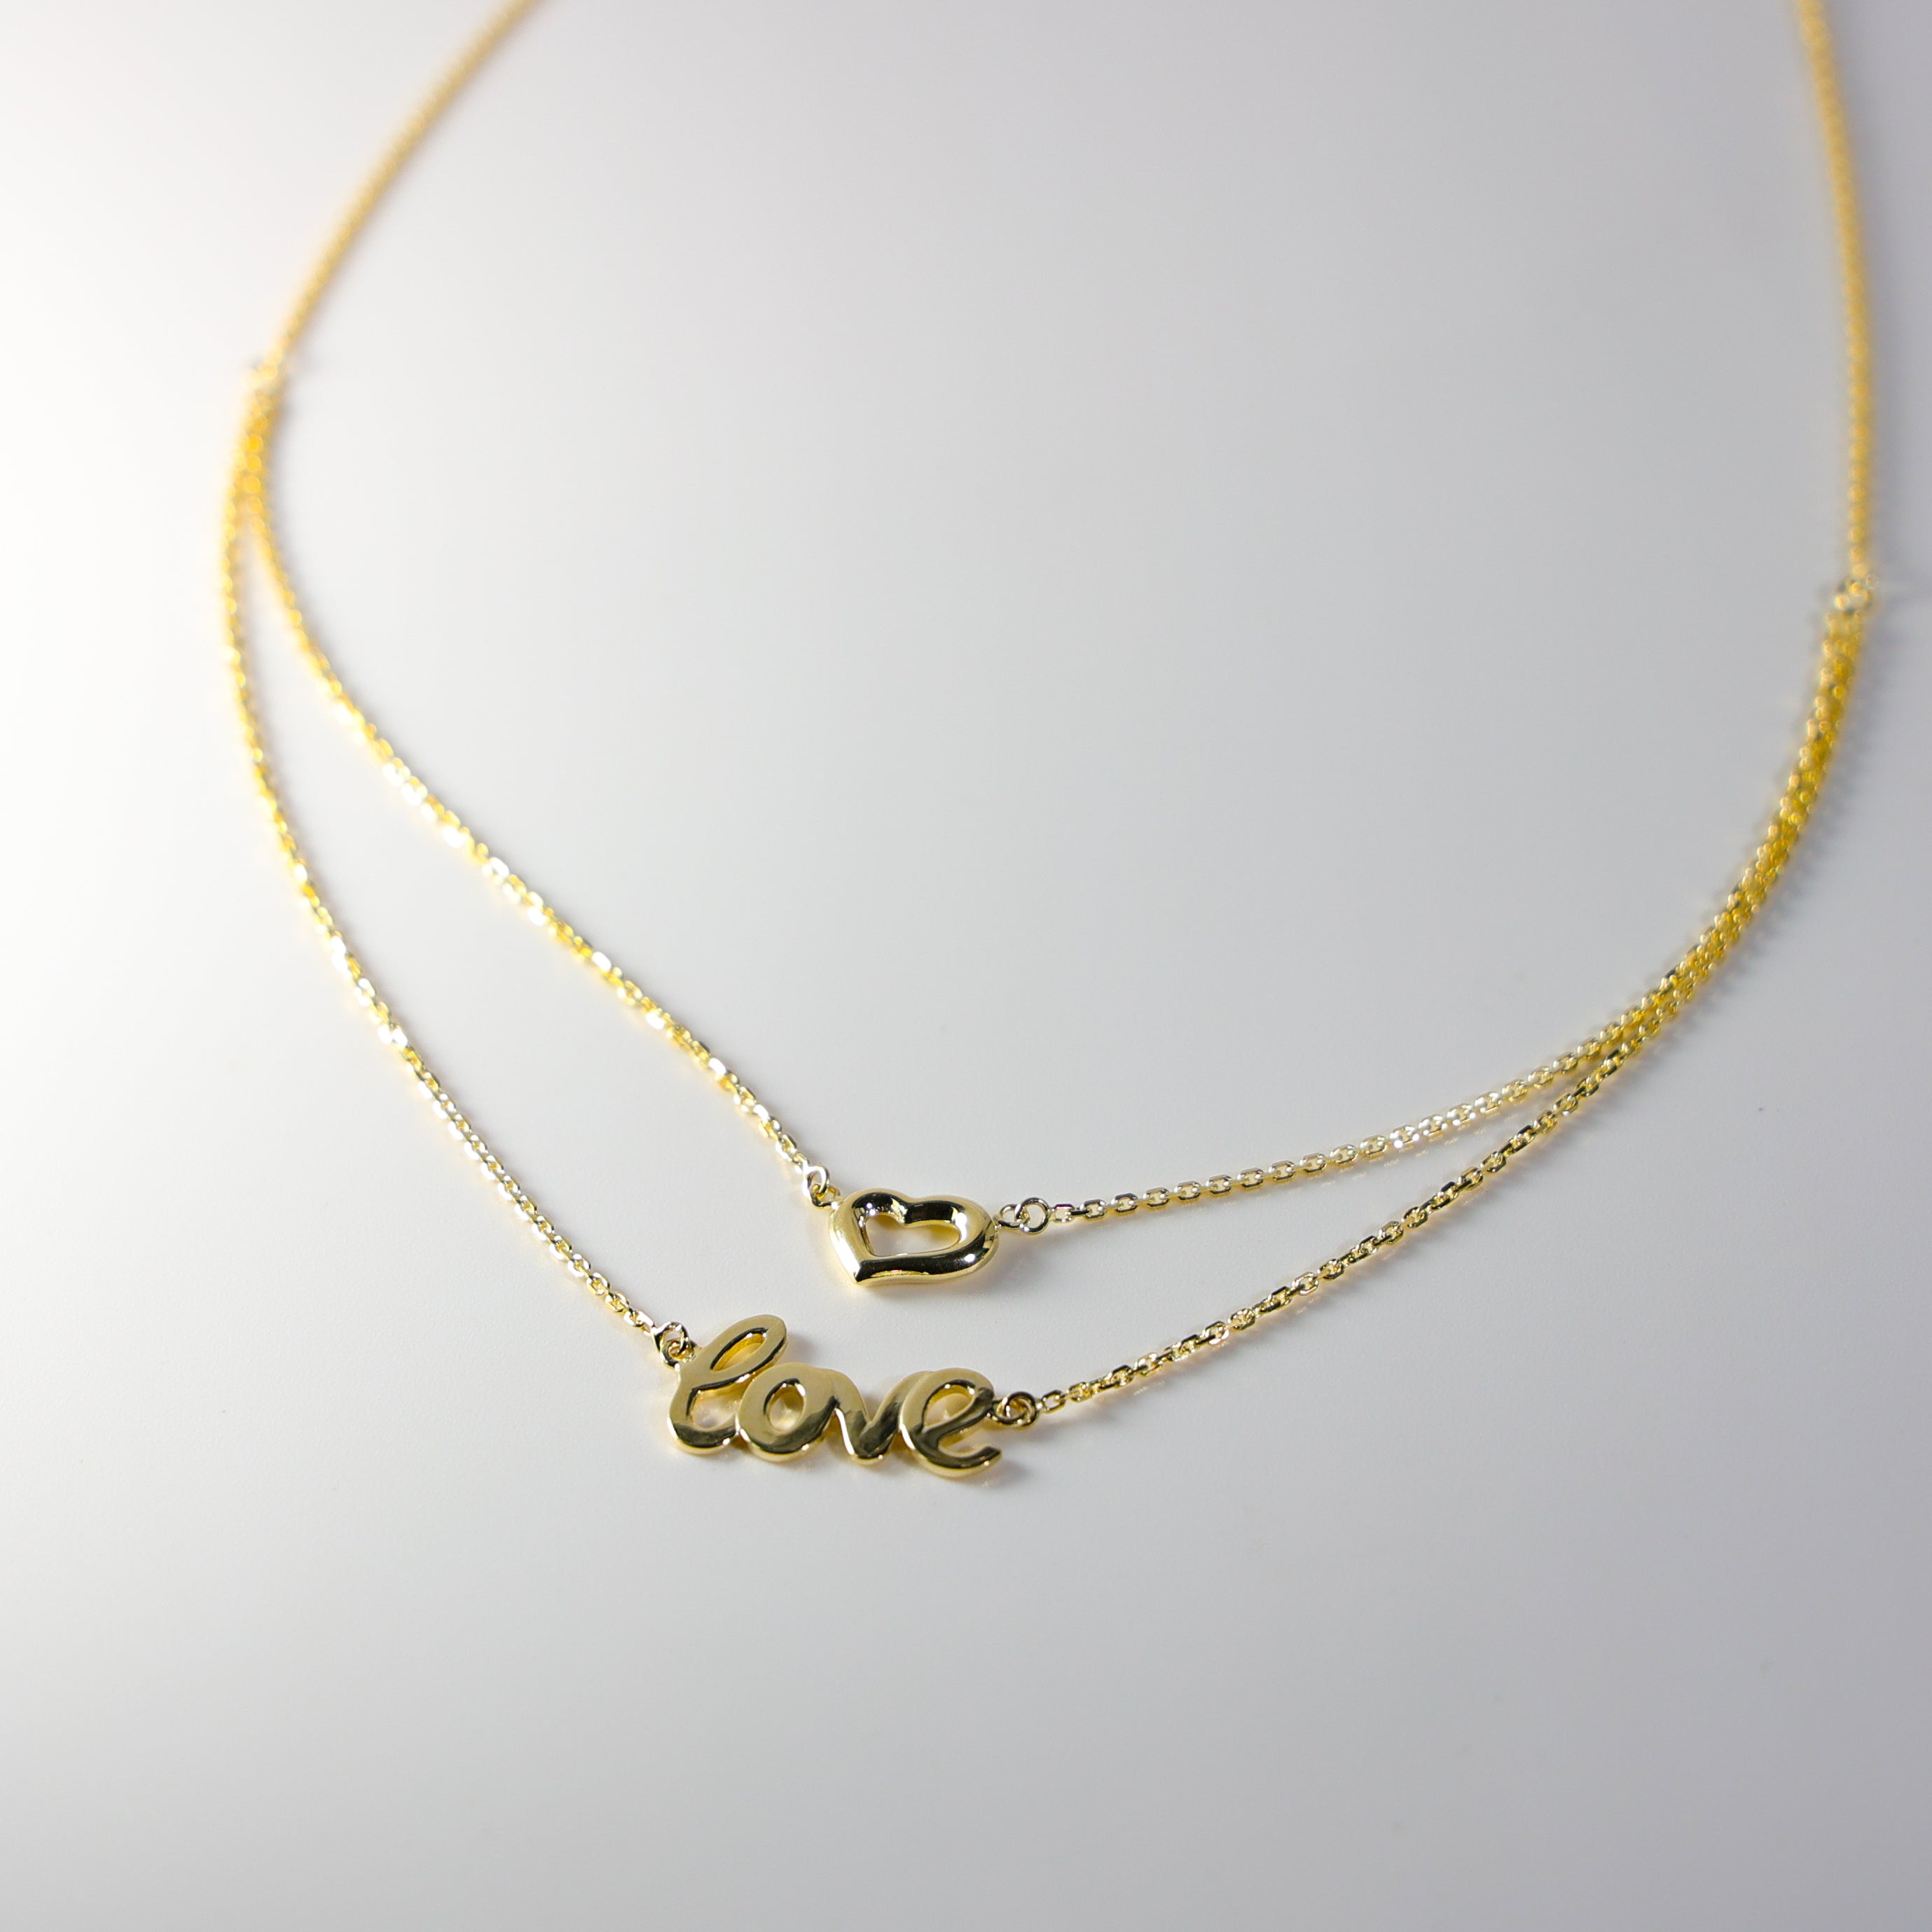 Gold Love Heart Necklace Model-NK0314 - Charlie & Co. Jewelry